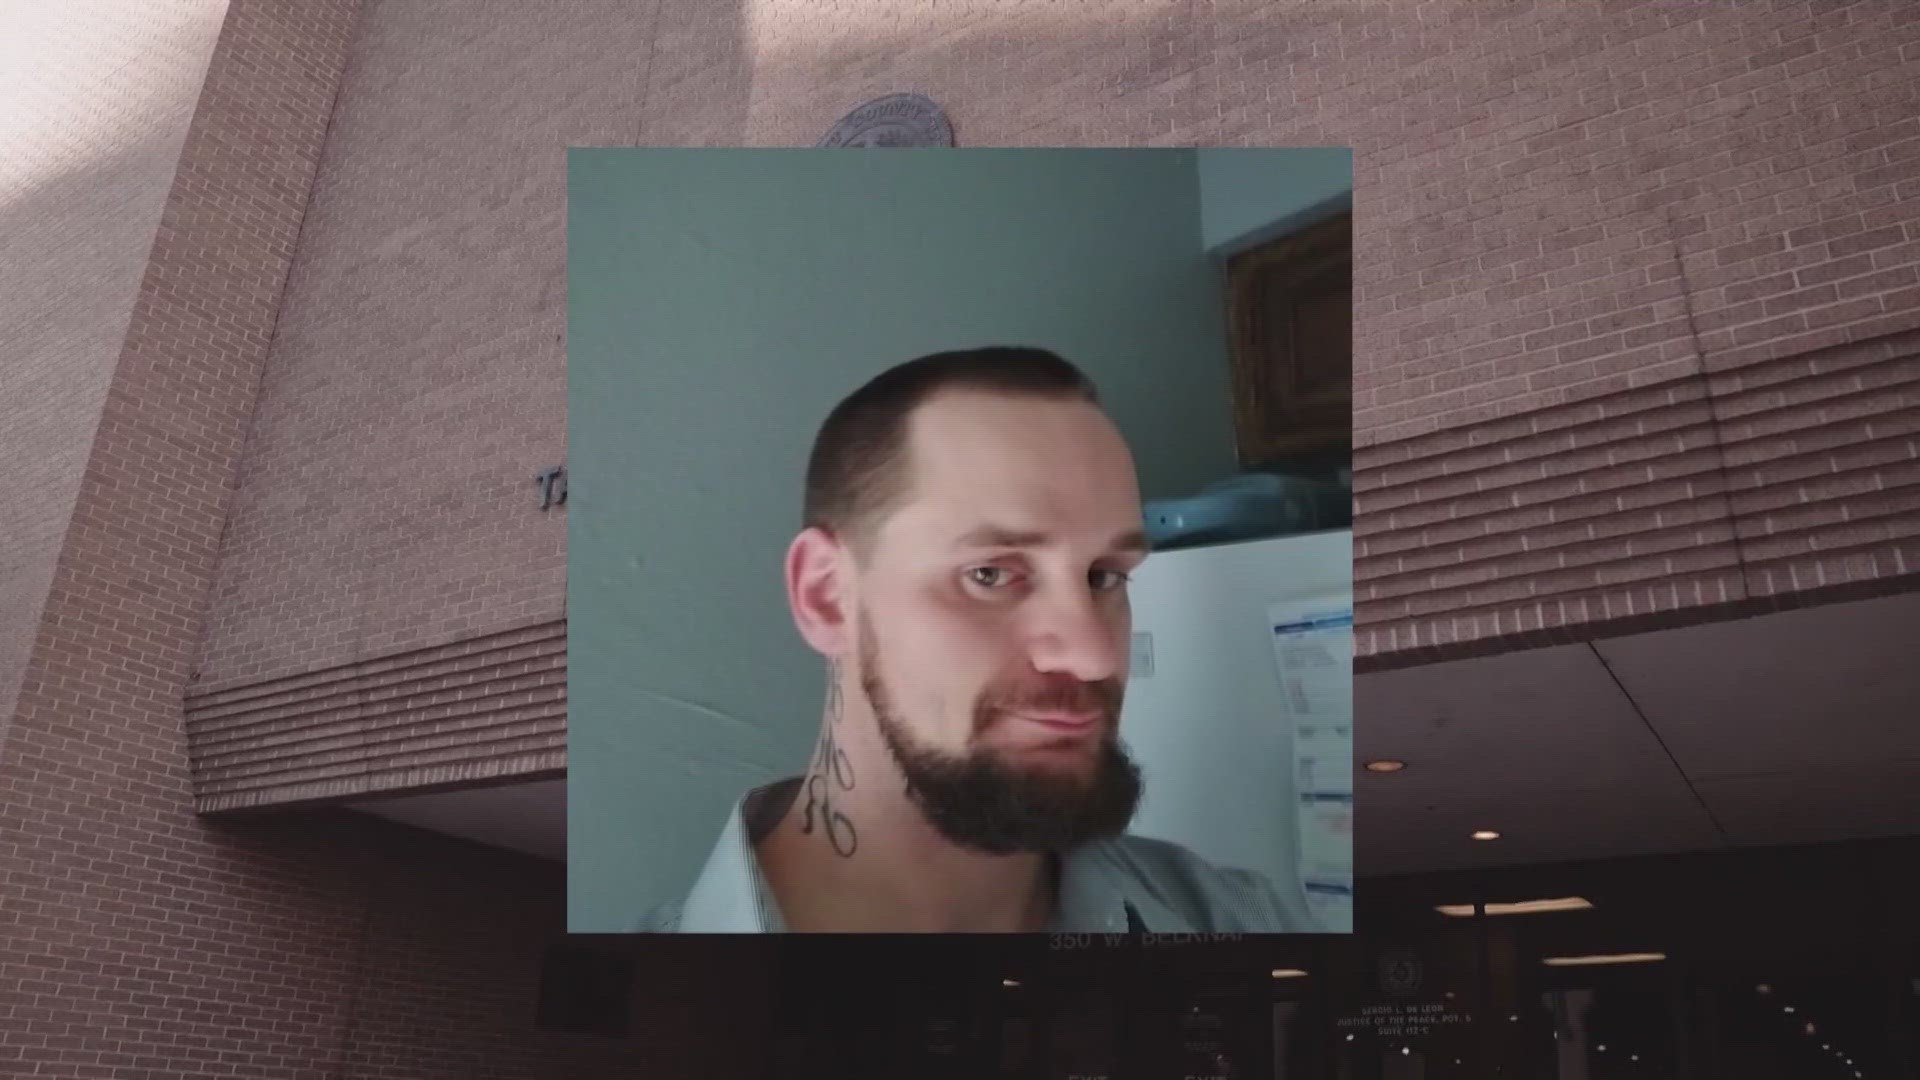 Tuesday marks a week since a Tarrant County inmate was found hanging in his jail cell.